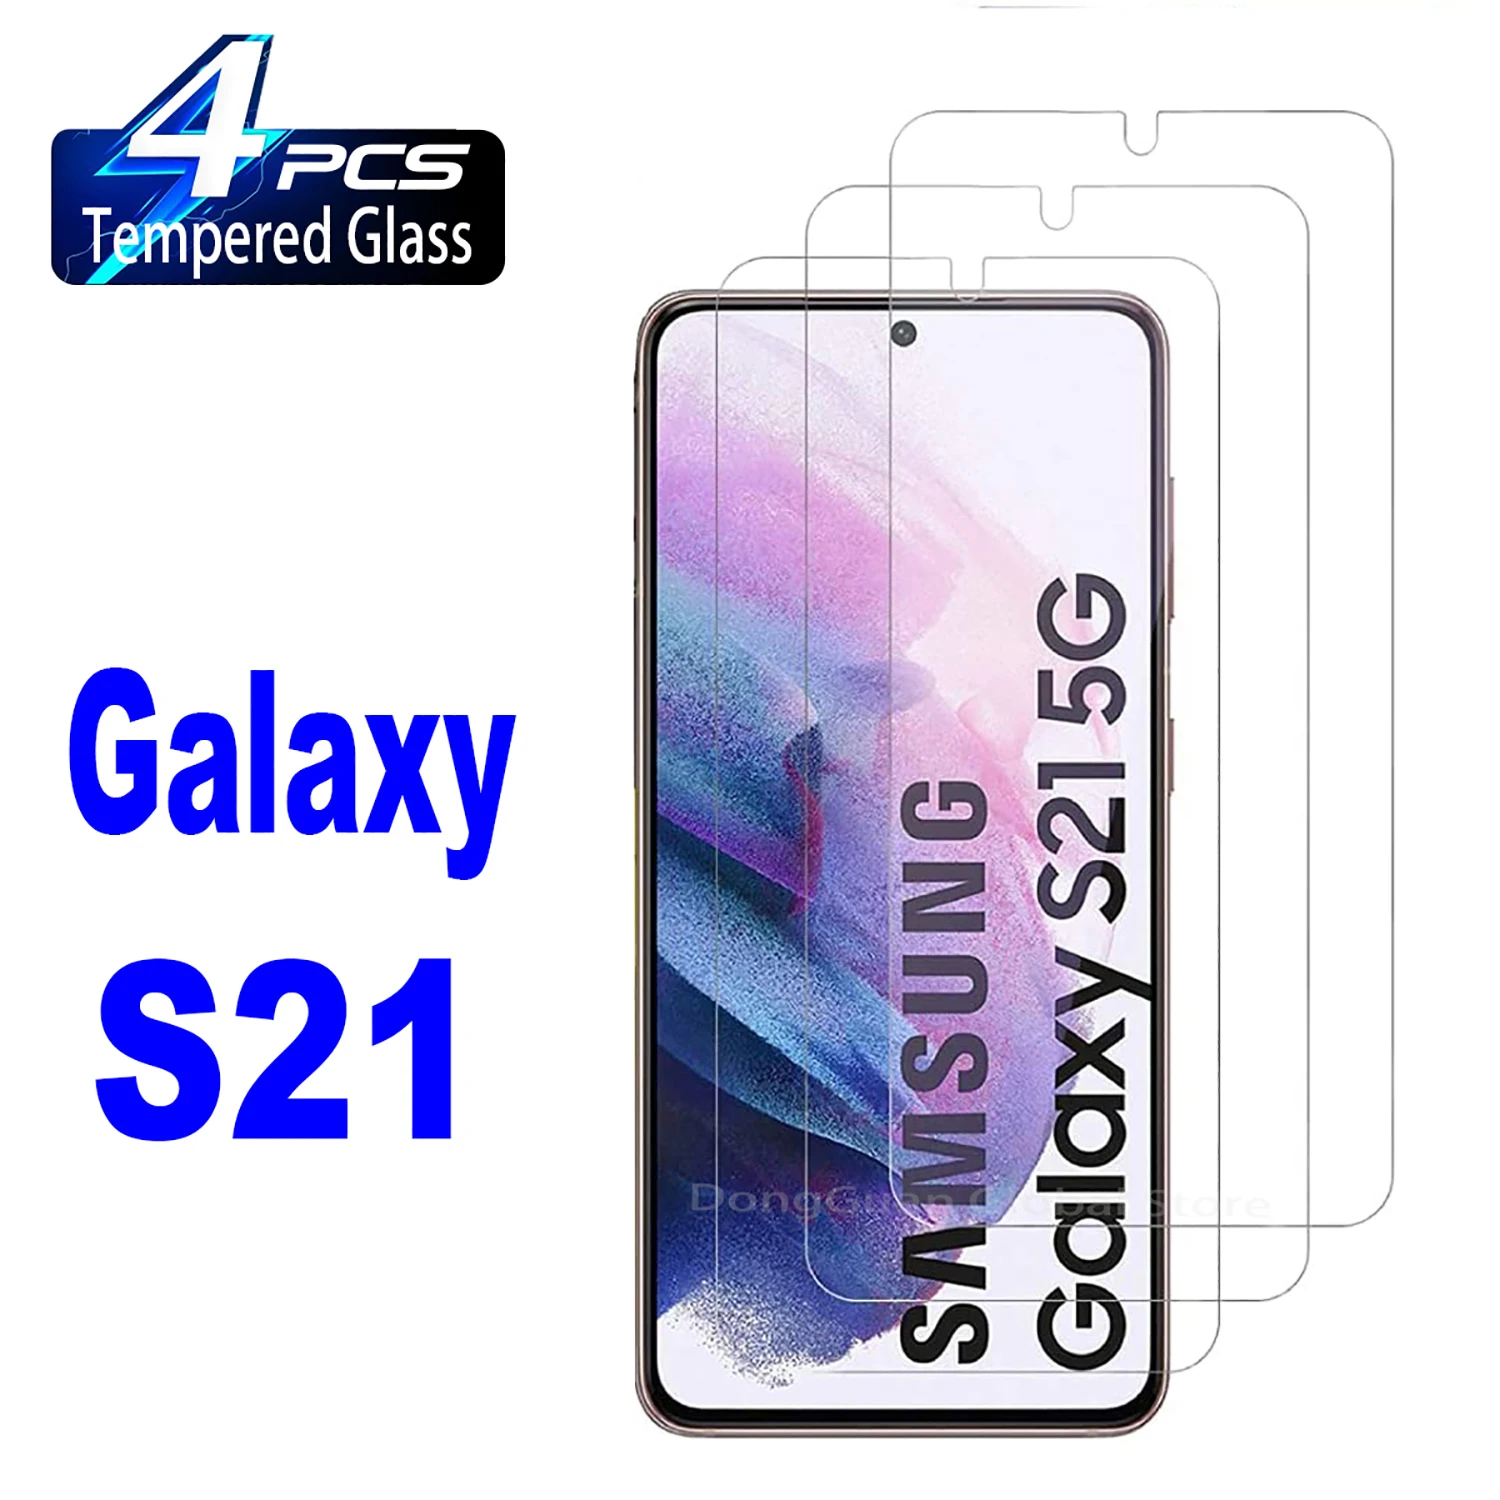 tempered glass for samsung s21 fe glass no fingerprint unlock function sansung s22 protective glass for sansung s21 fe 5g screen protector samsung s22 plus glass films no fingerprint unlock samsung galaxy s21 fe glass 1/4Pcs 0.2mm Tempered Glass For Samsung Galaxy S21 5G SM-G991 Fingerprint Unlock Anti Scratch Screen Protector Glass